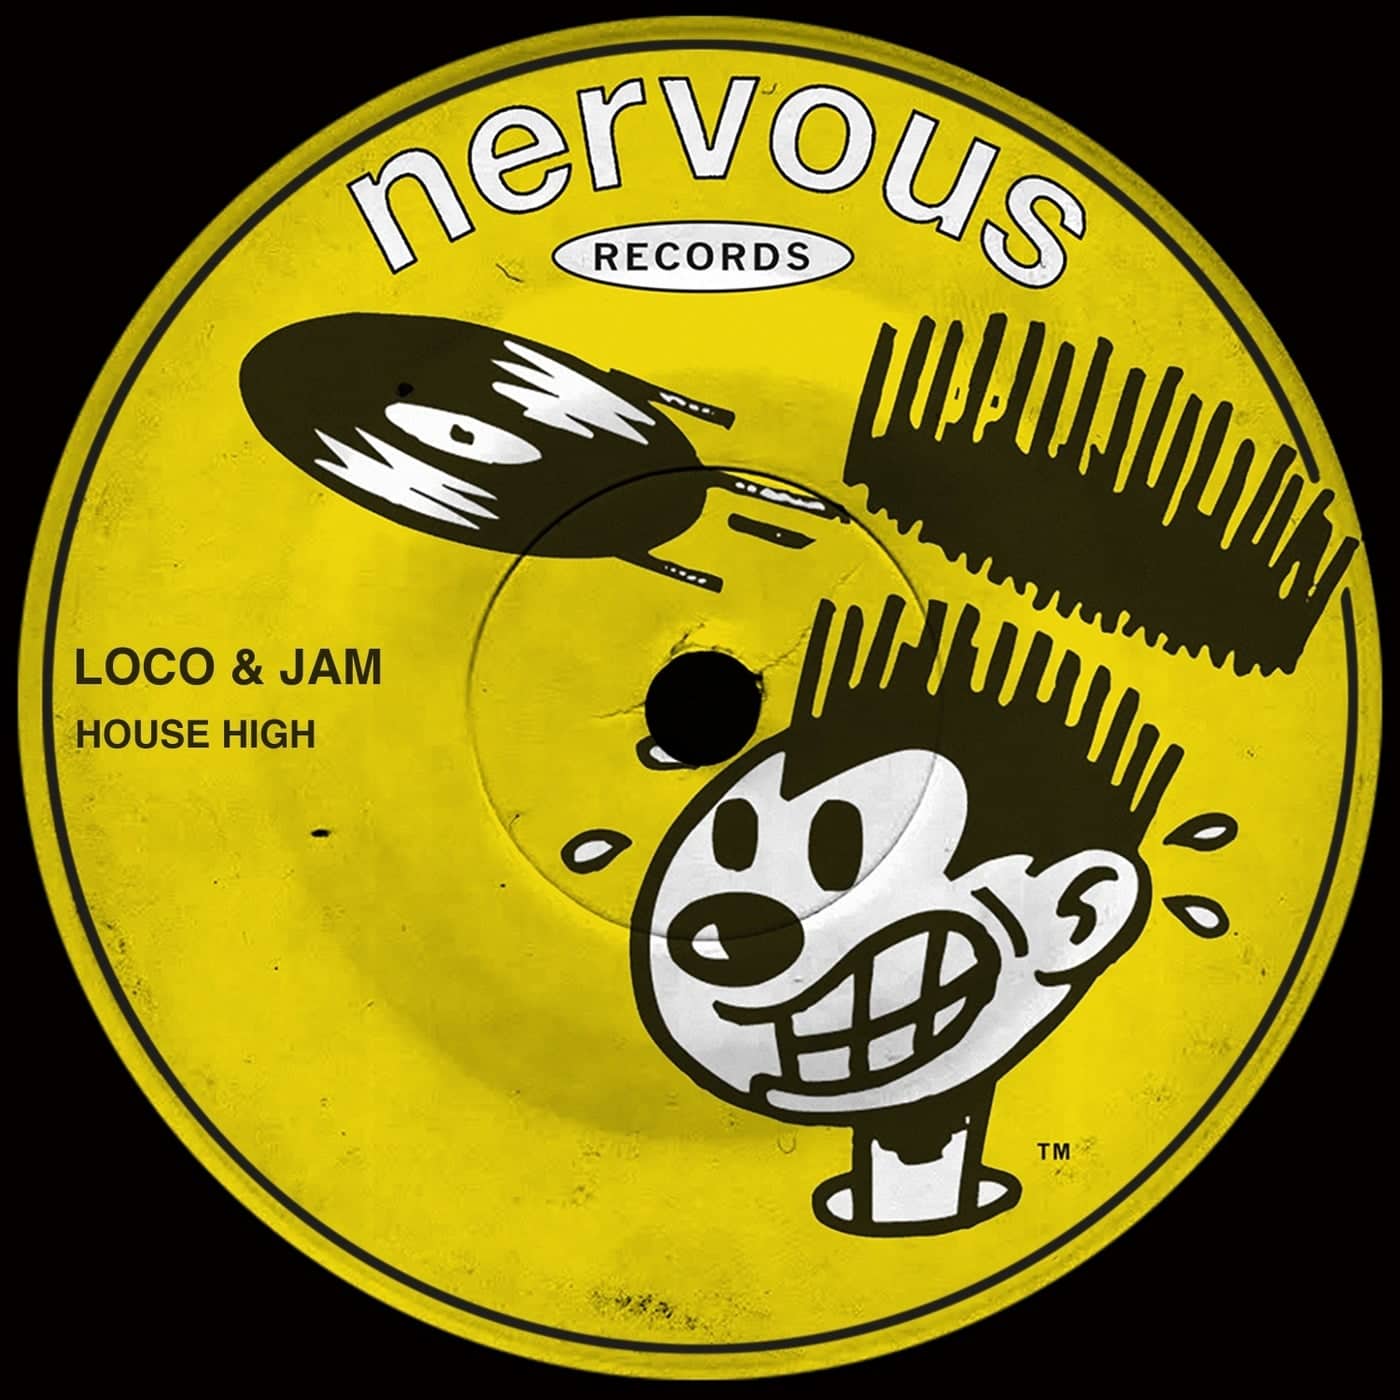 image cover: House High by Loco & Jam on Nervous Records